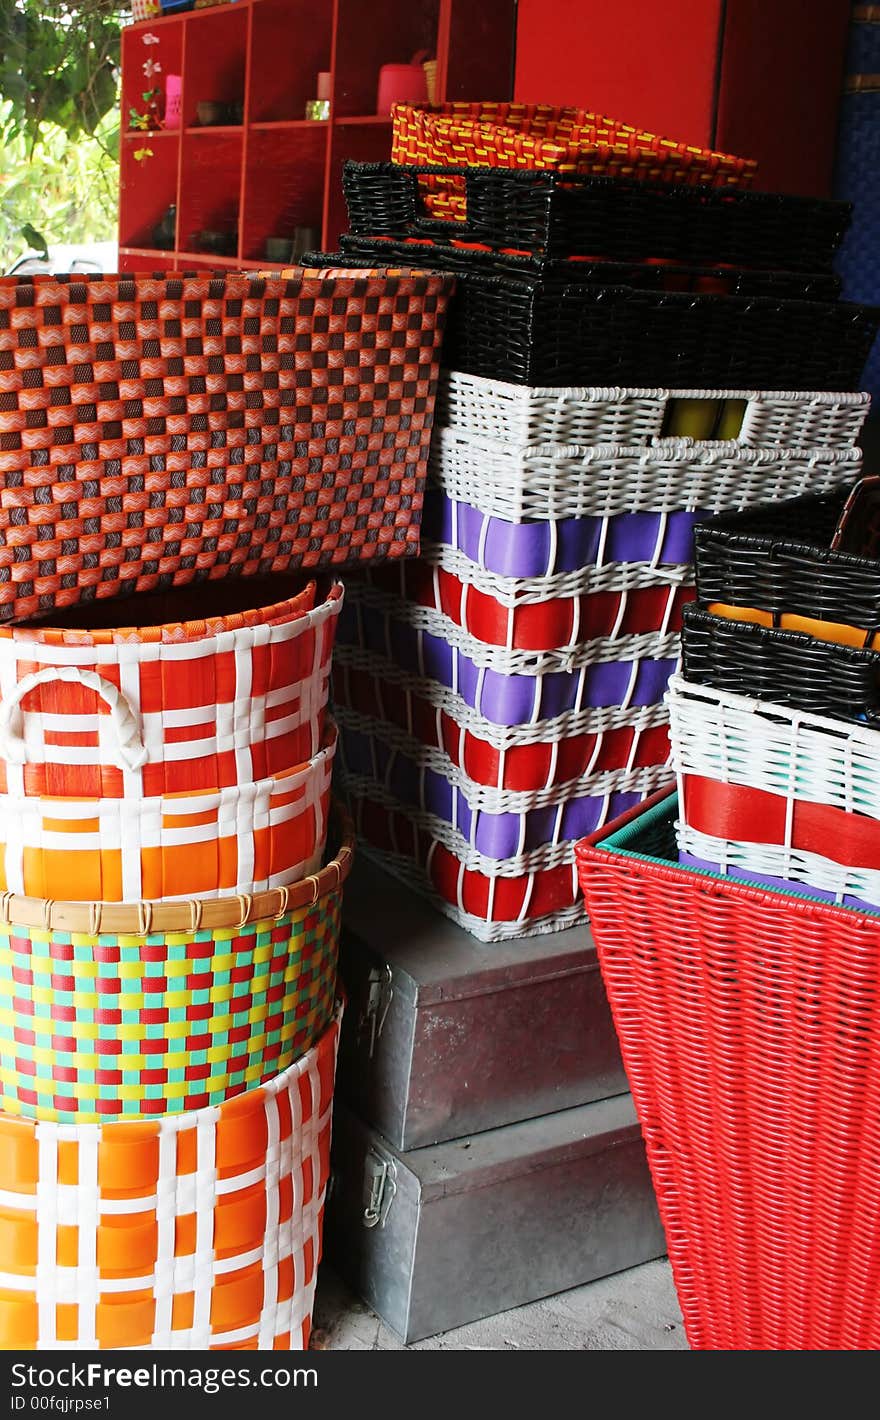 Colorful cane baskets stacked in a pile